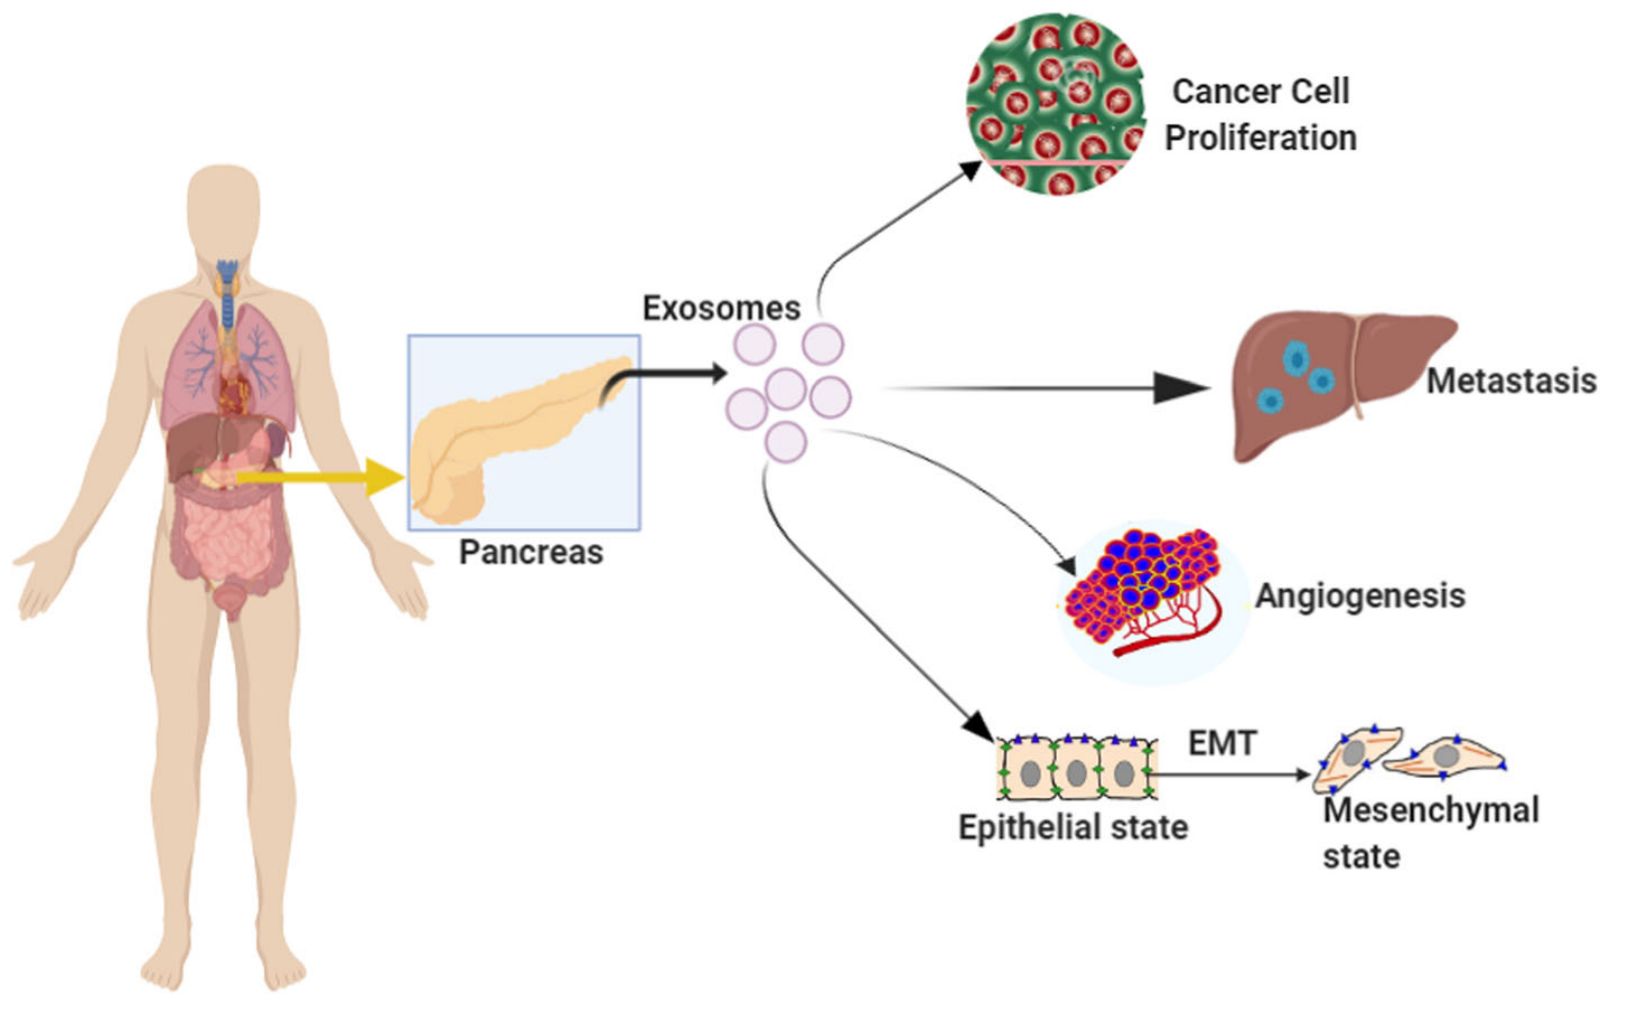 Figure 1. The role of exosomes in pancreatic cancer progression.